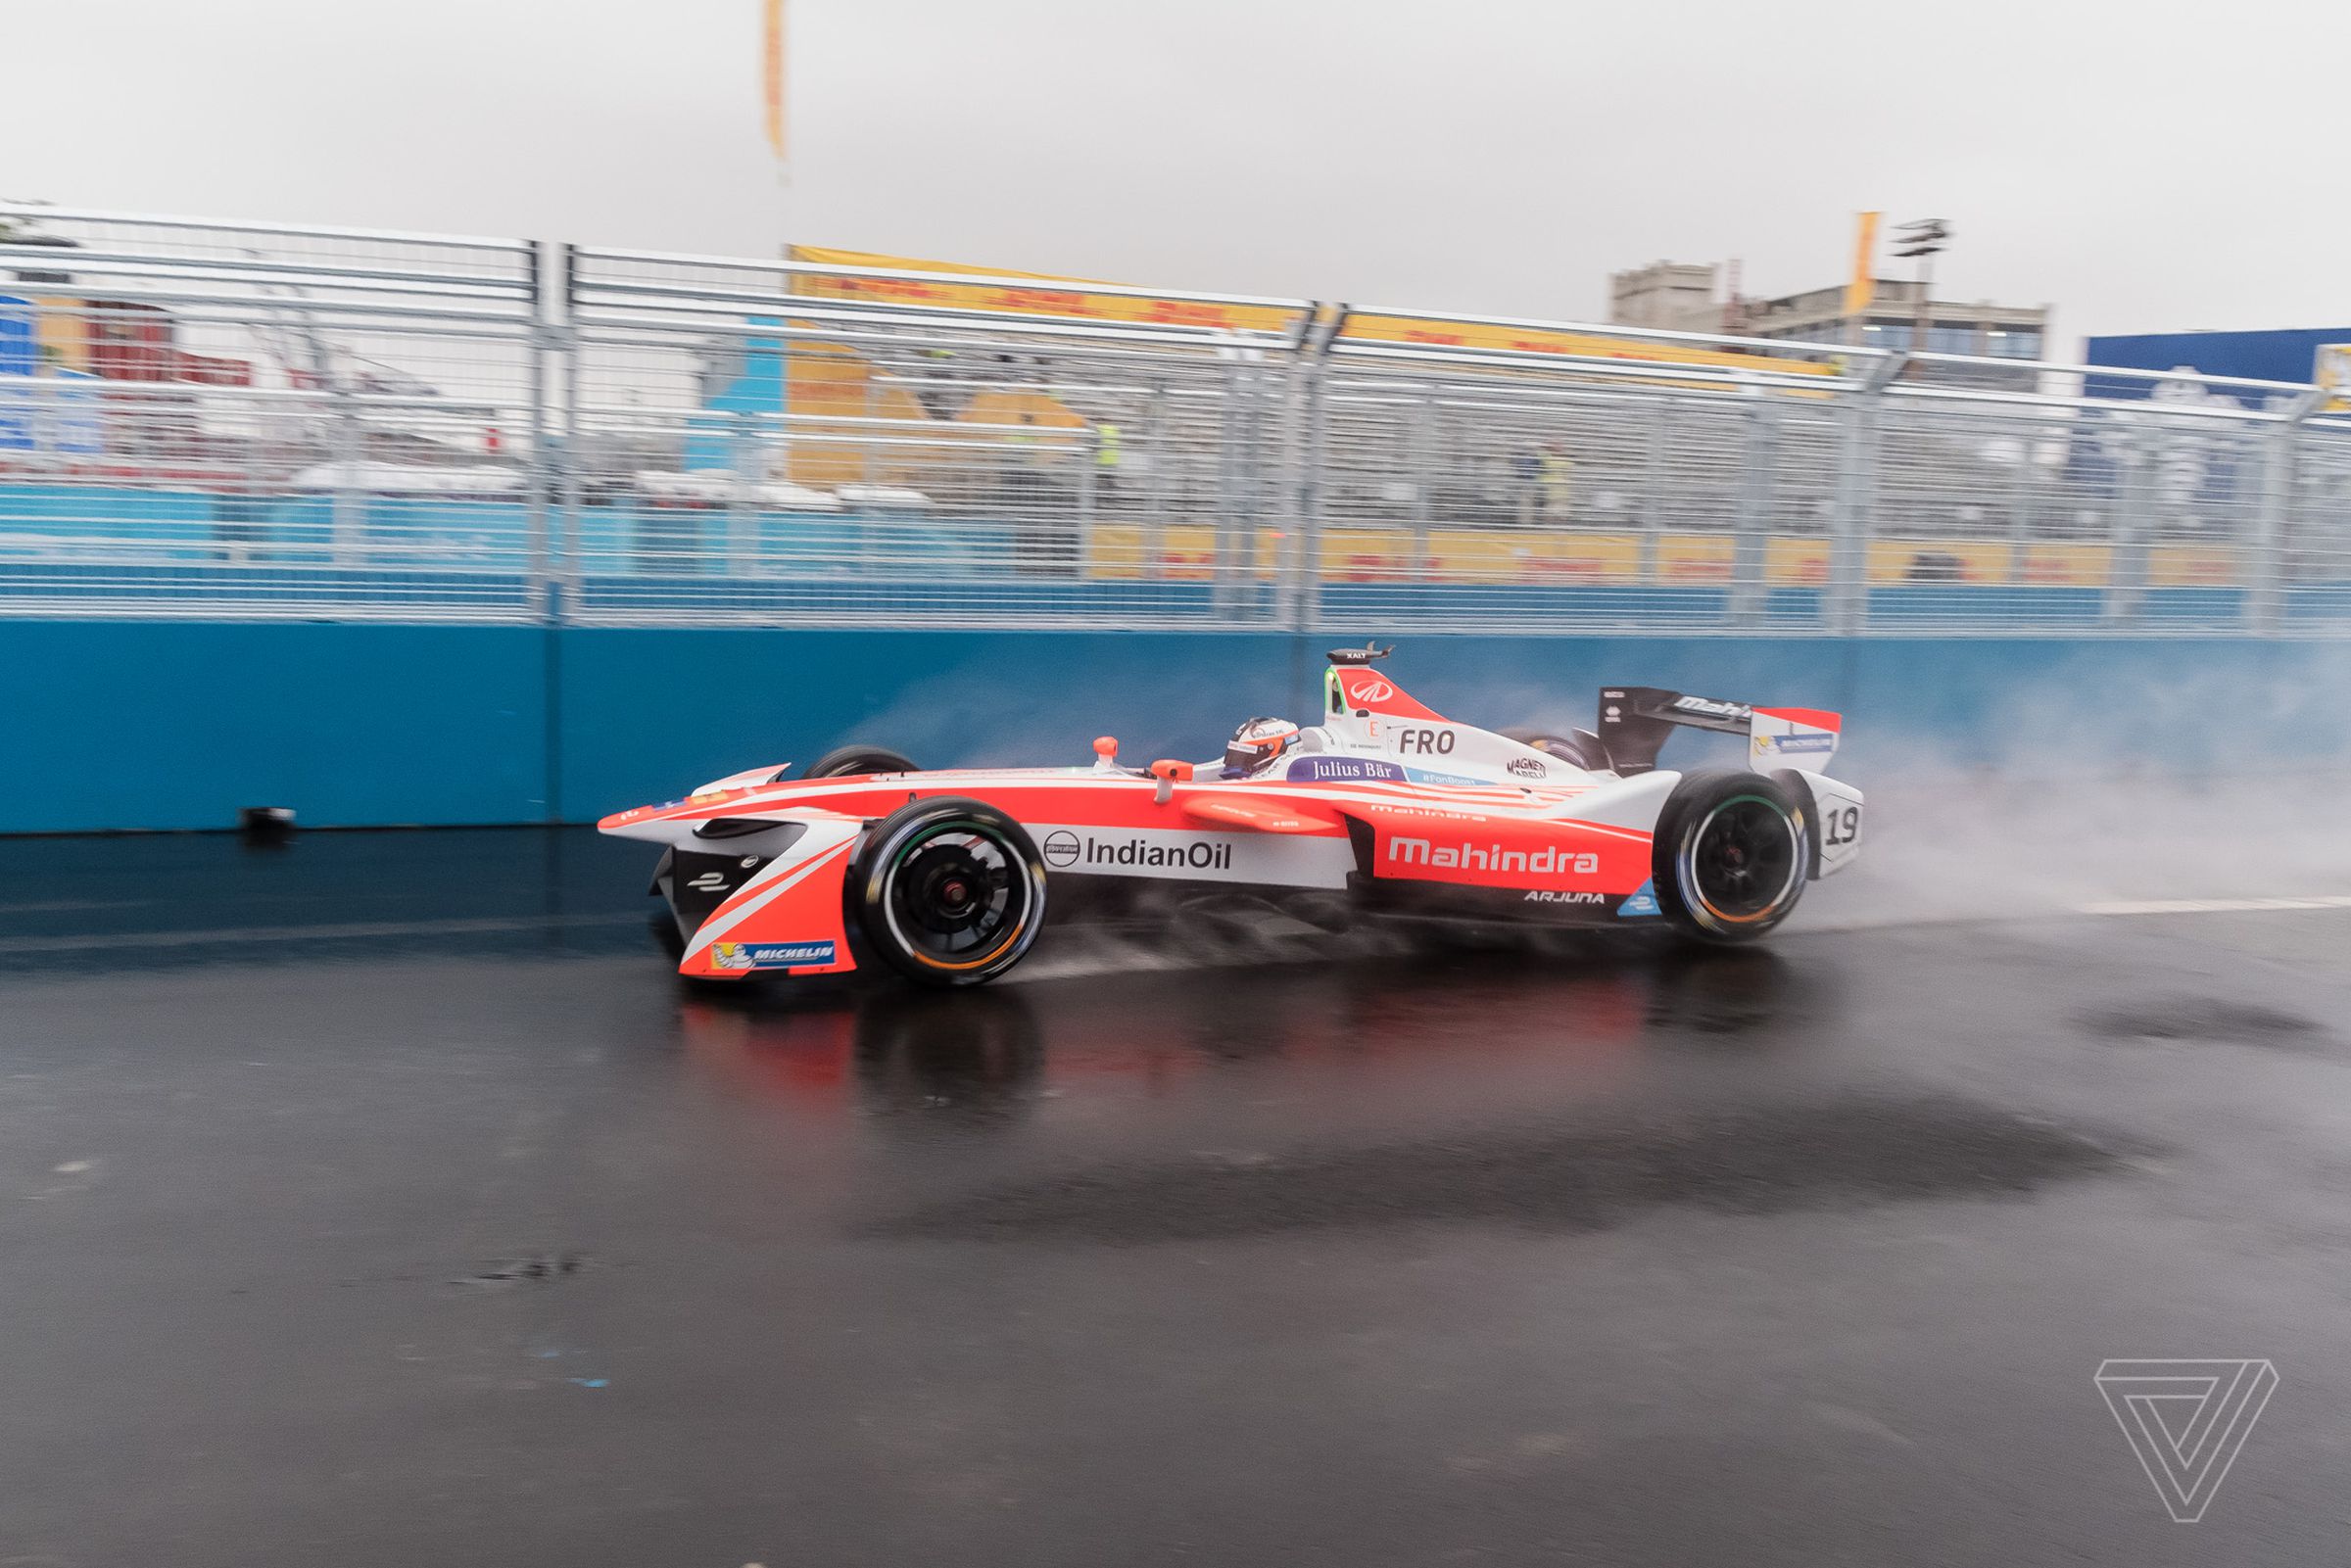 Mahindra Racing’s Felix Rosenqvist — who came to Formula E after racing in everything from F3 to Indy Lights — puts the Michelin tires to the test.